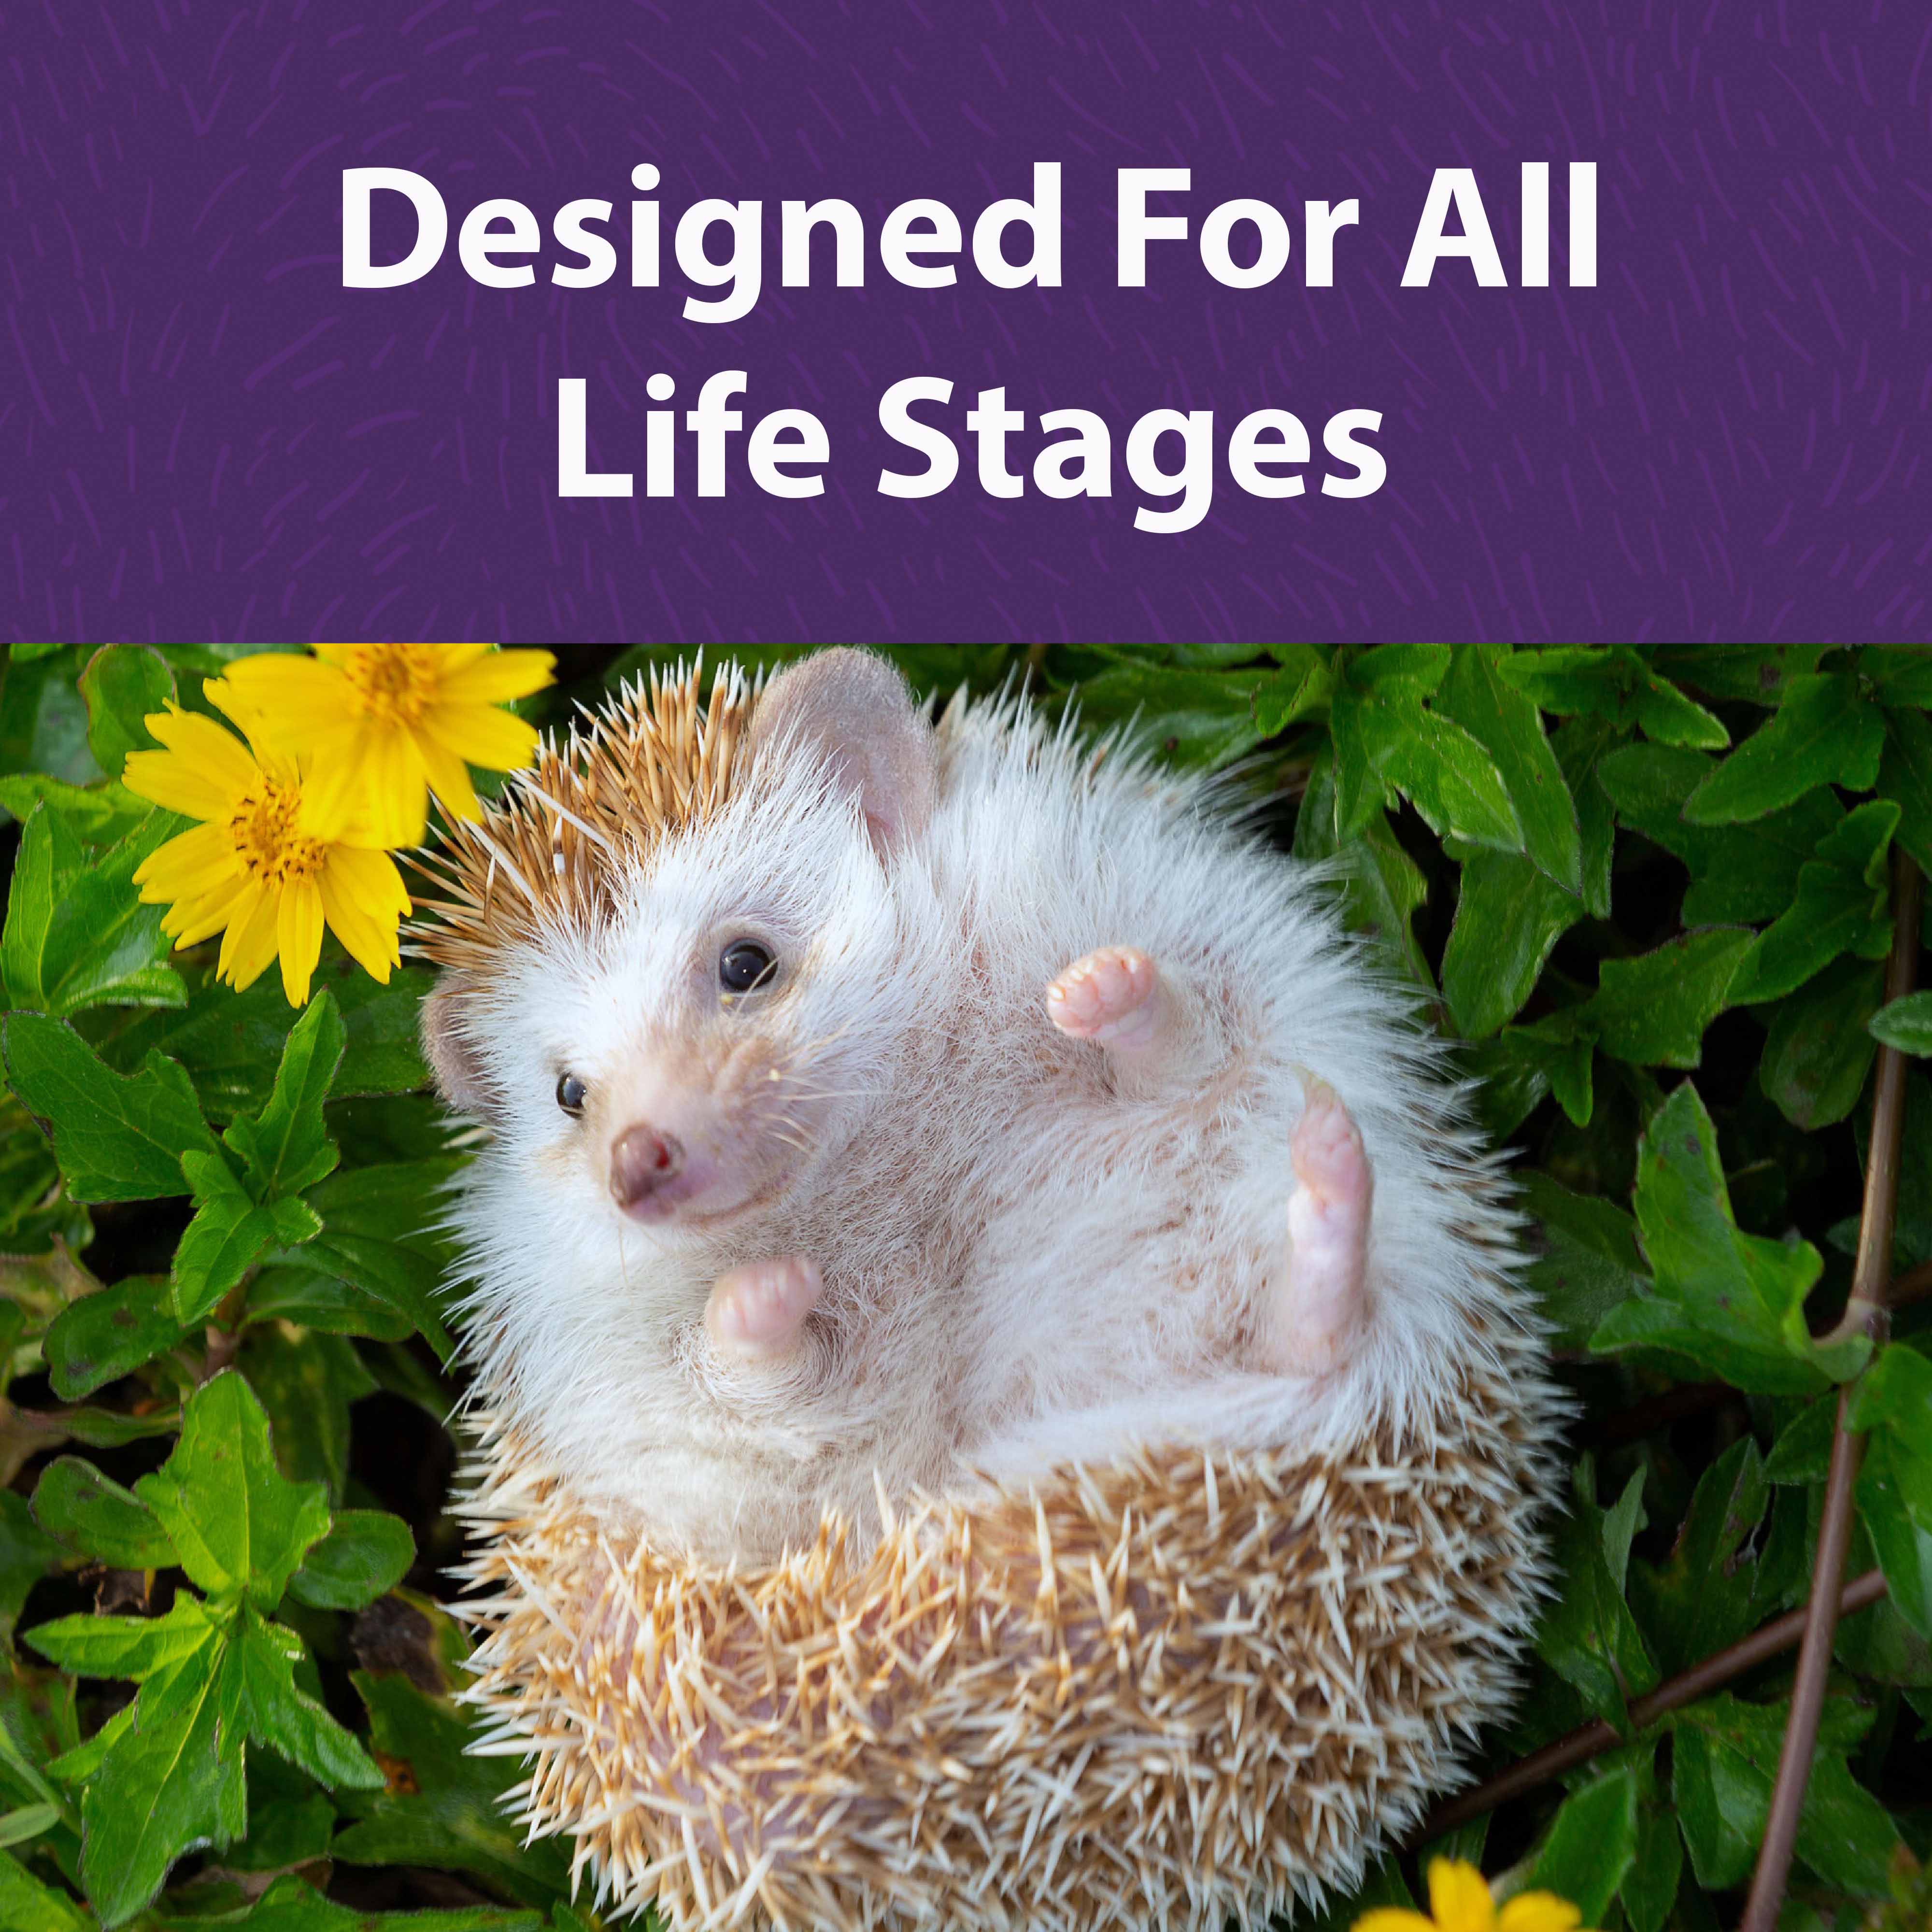 Designed for all life stages